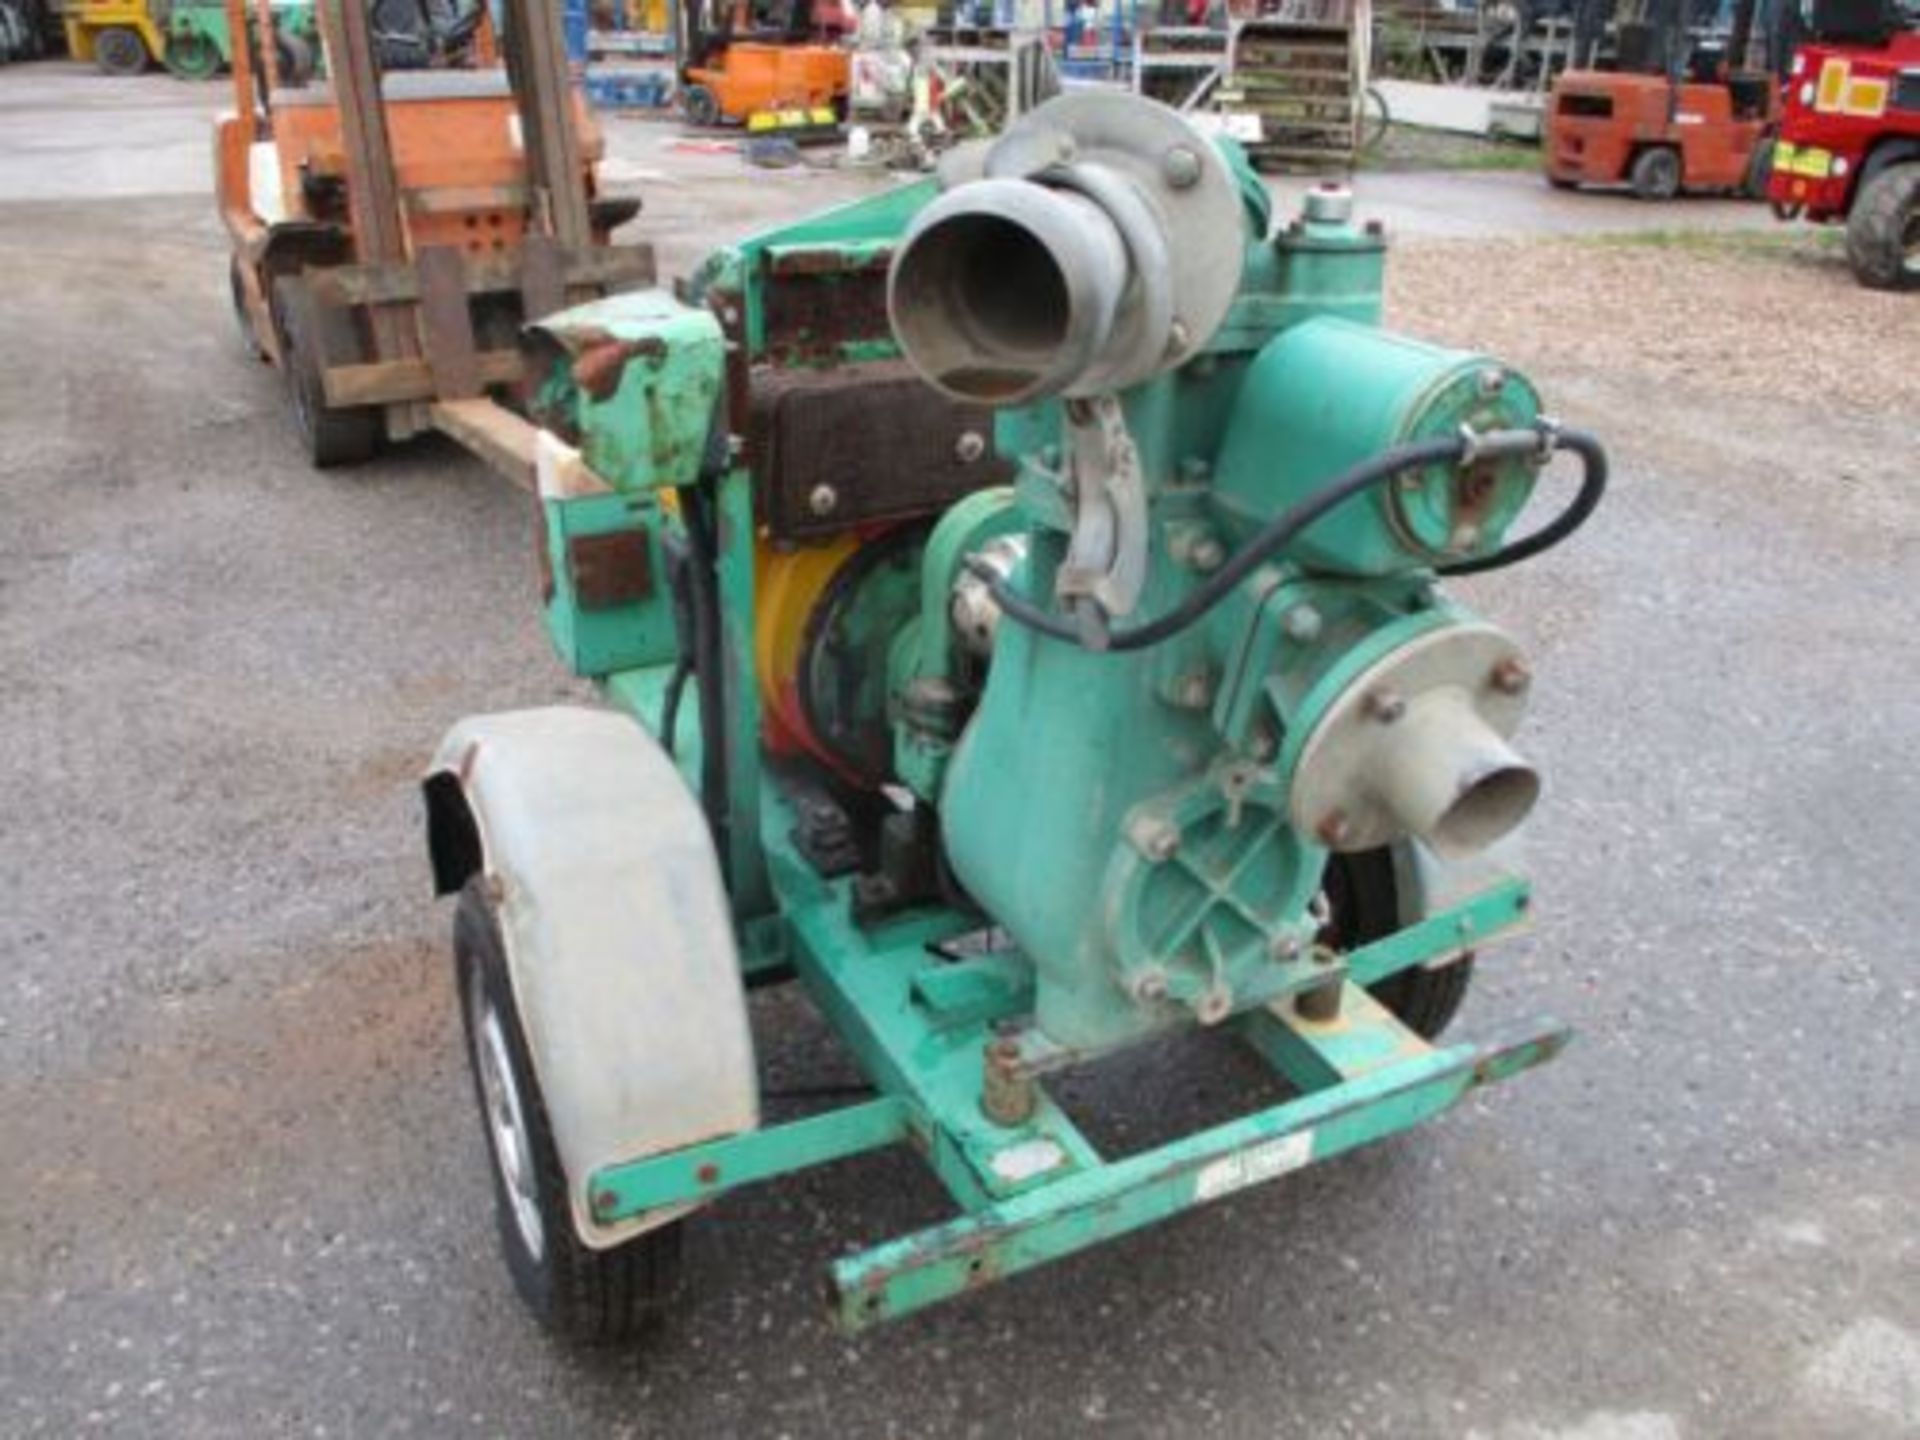 HILTA HYDRY 4 INCH " TOWABLE WATER PUMP HATZ DIESEL ENGINE DELIVERY ARRANGED - Image 3 of 5